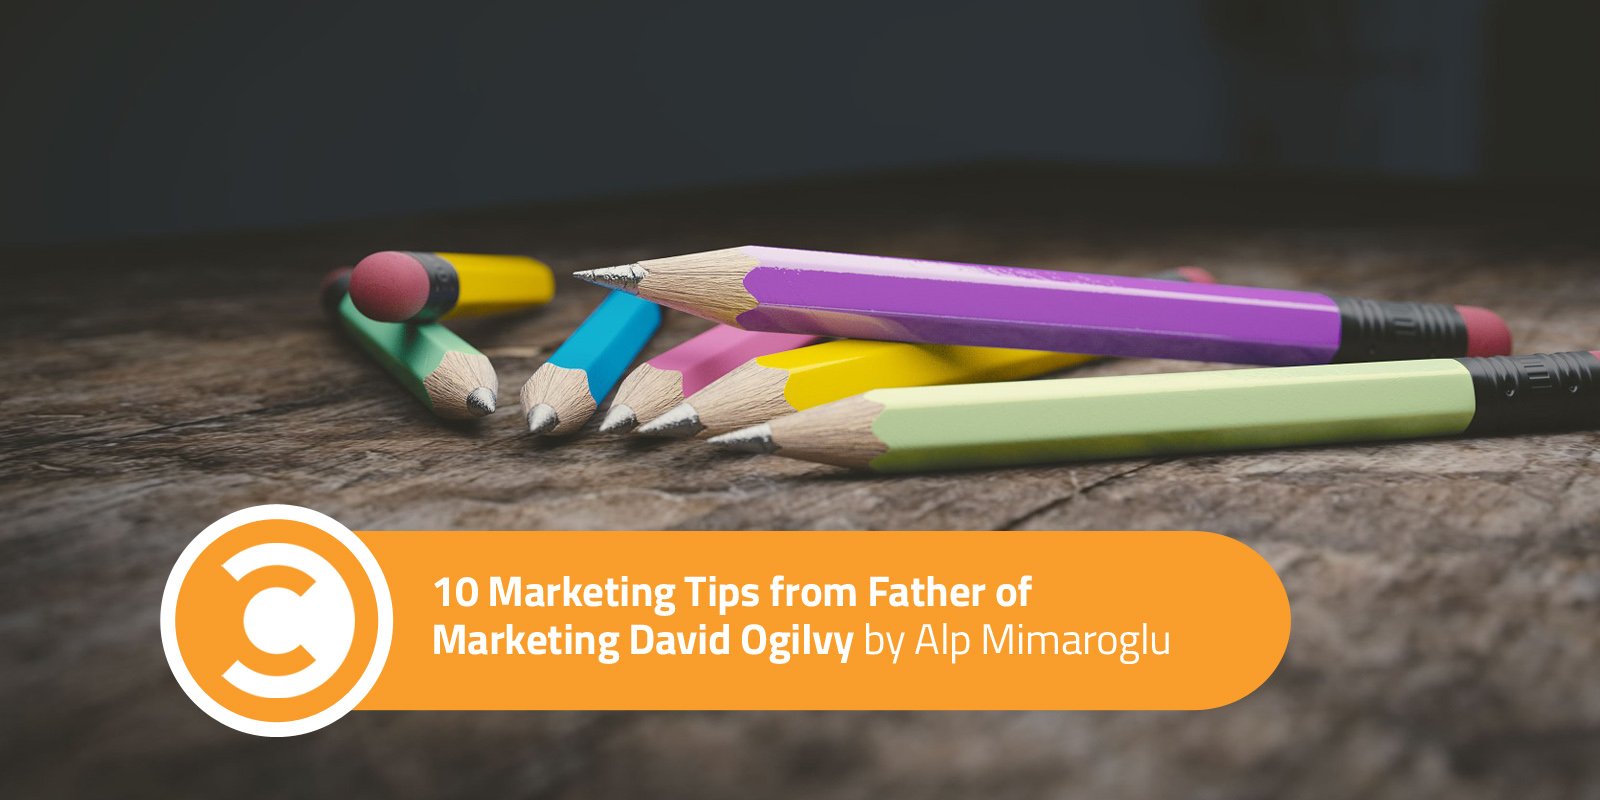 10 Marketing Tips from Father of Marketing David Ogilvy